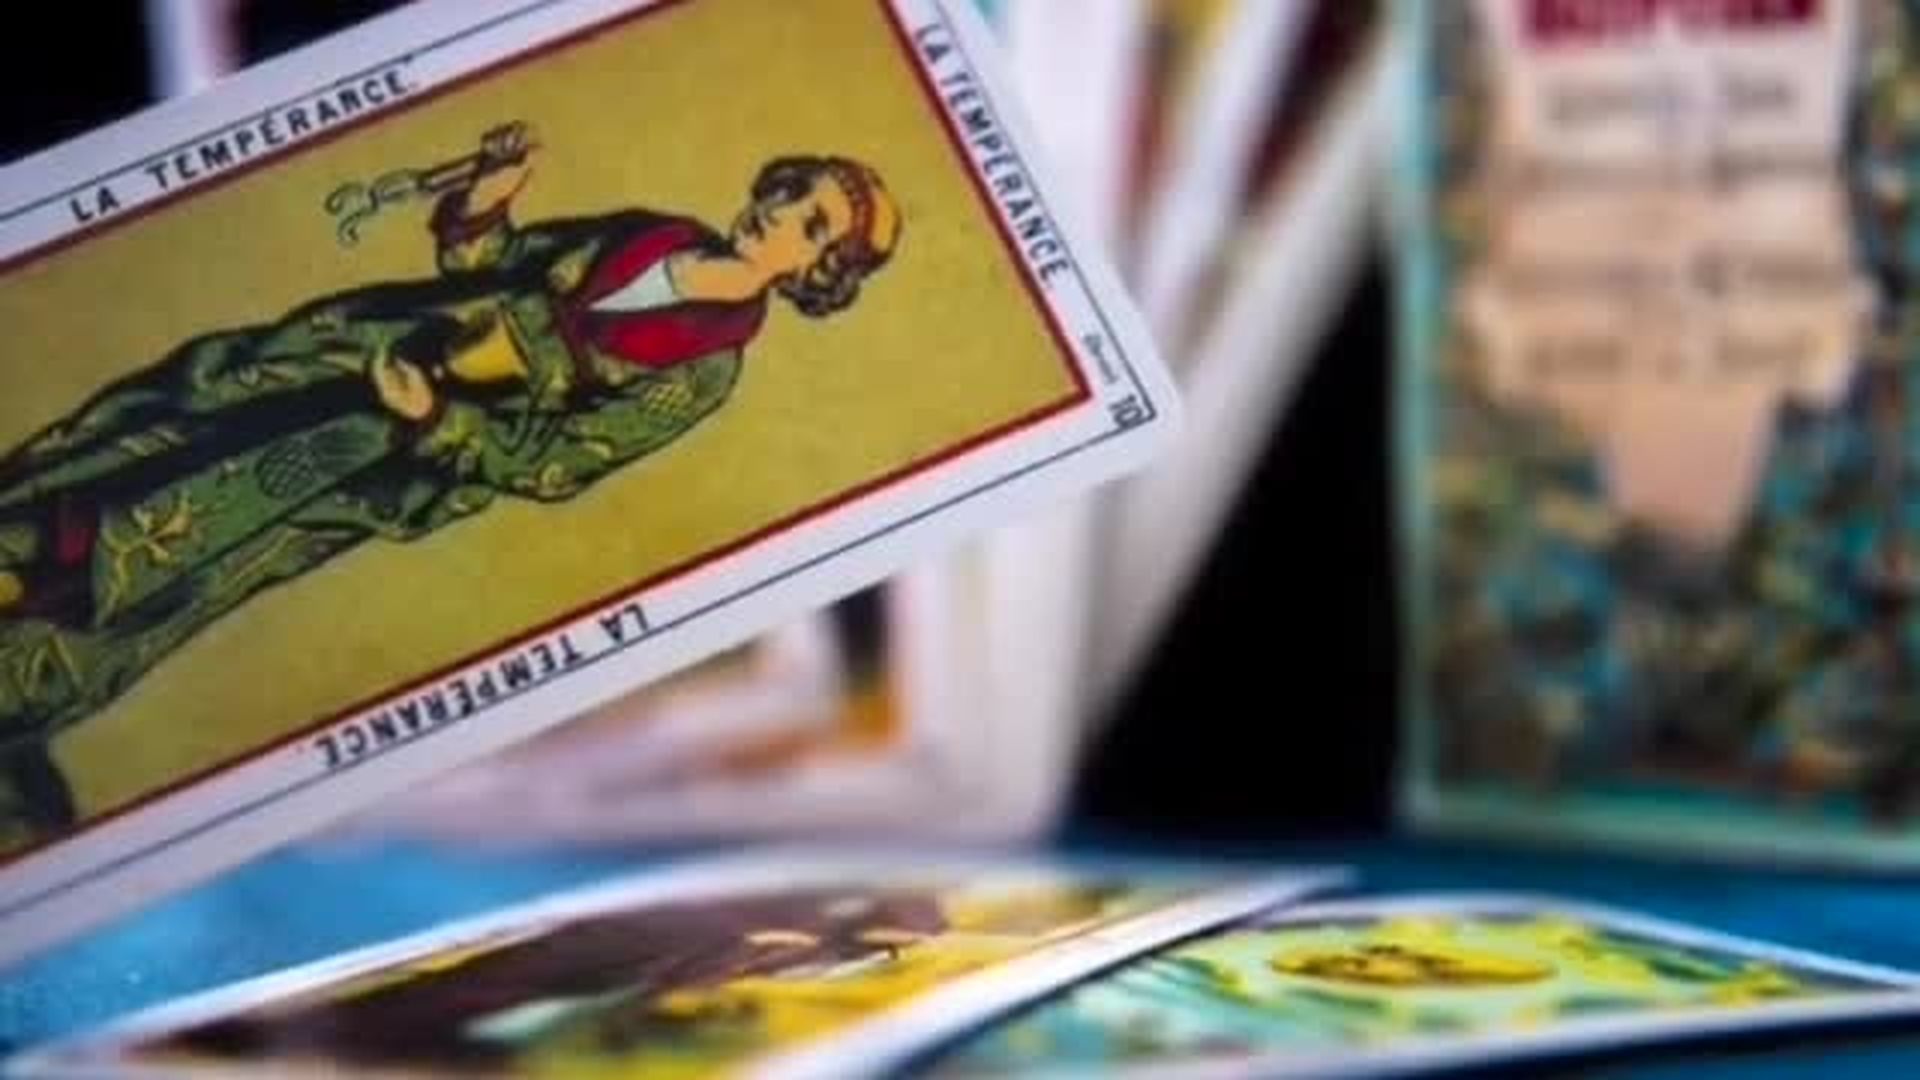 Senior Minister Marlene Morris Shares Her Knowledge of the Tarot and Pulls Cards for Humanity